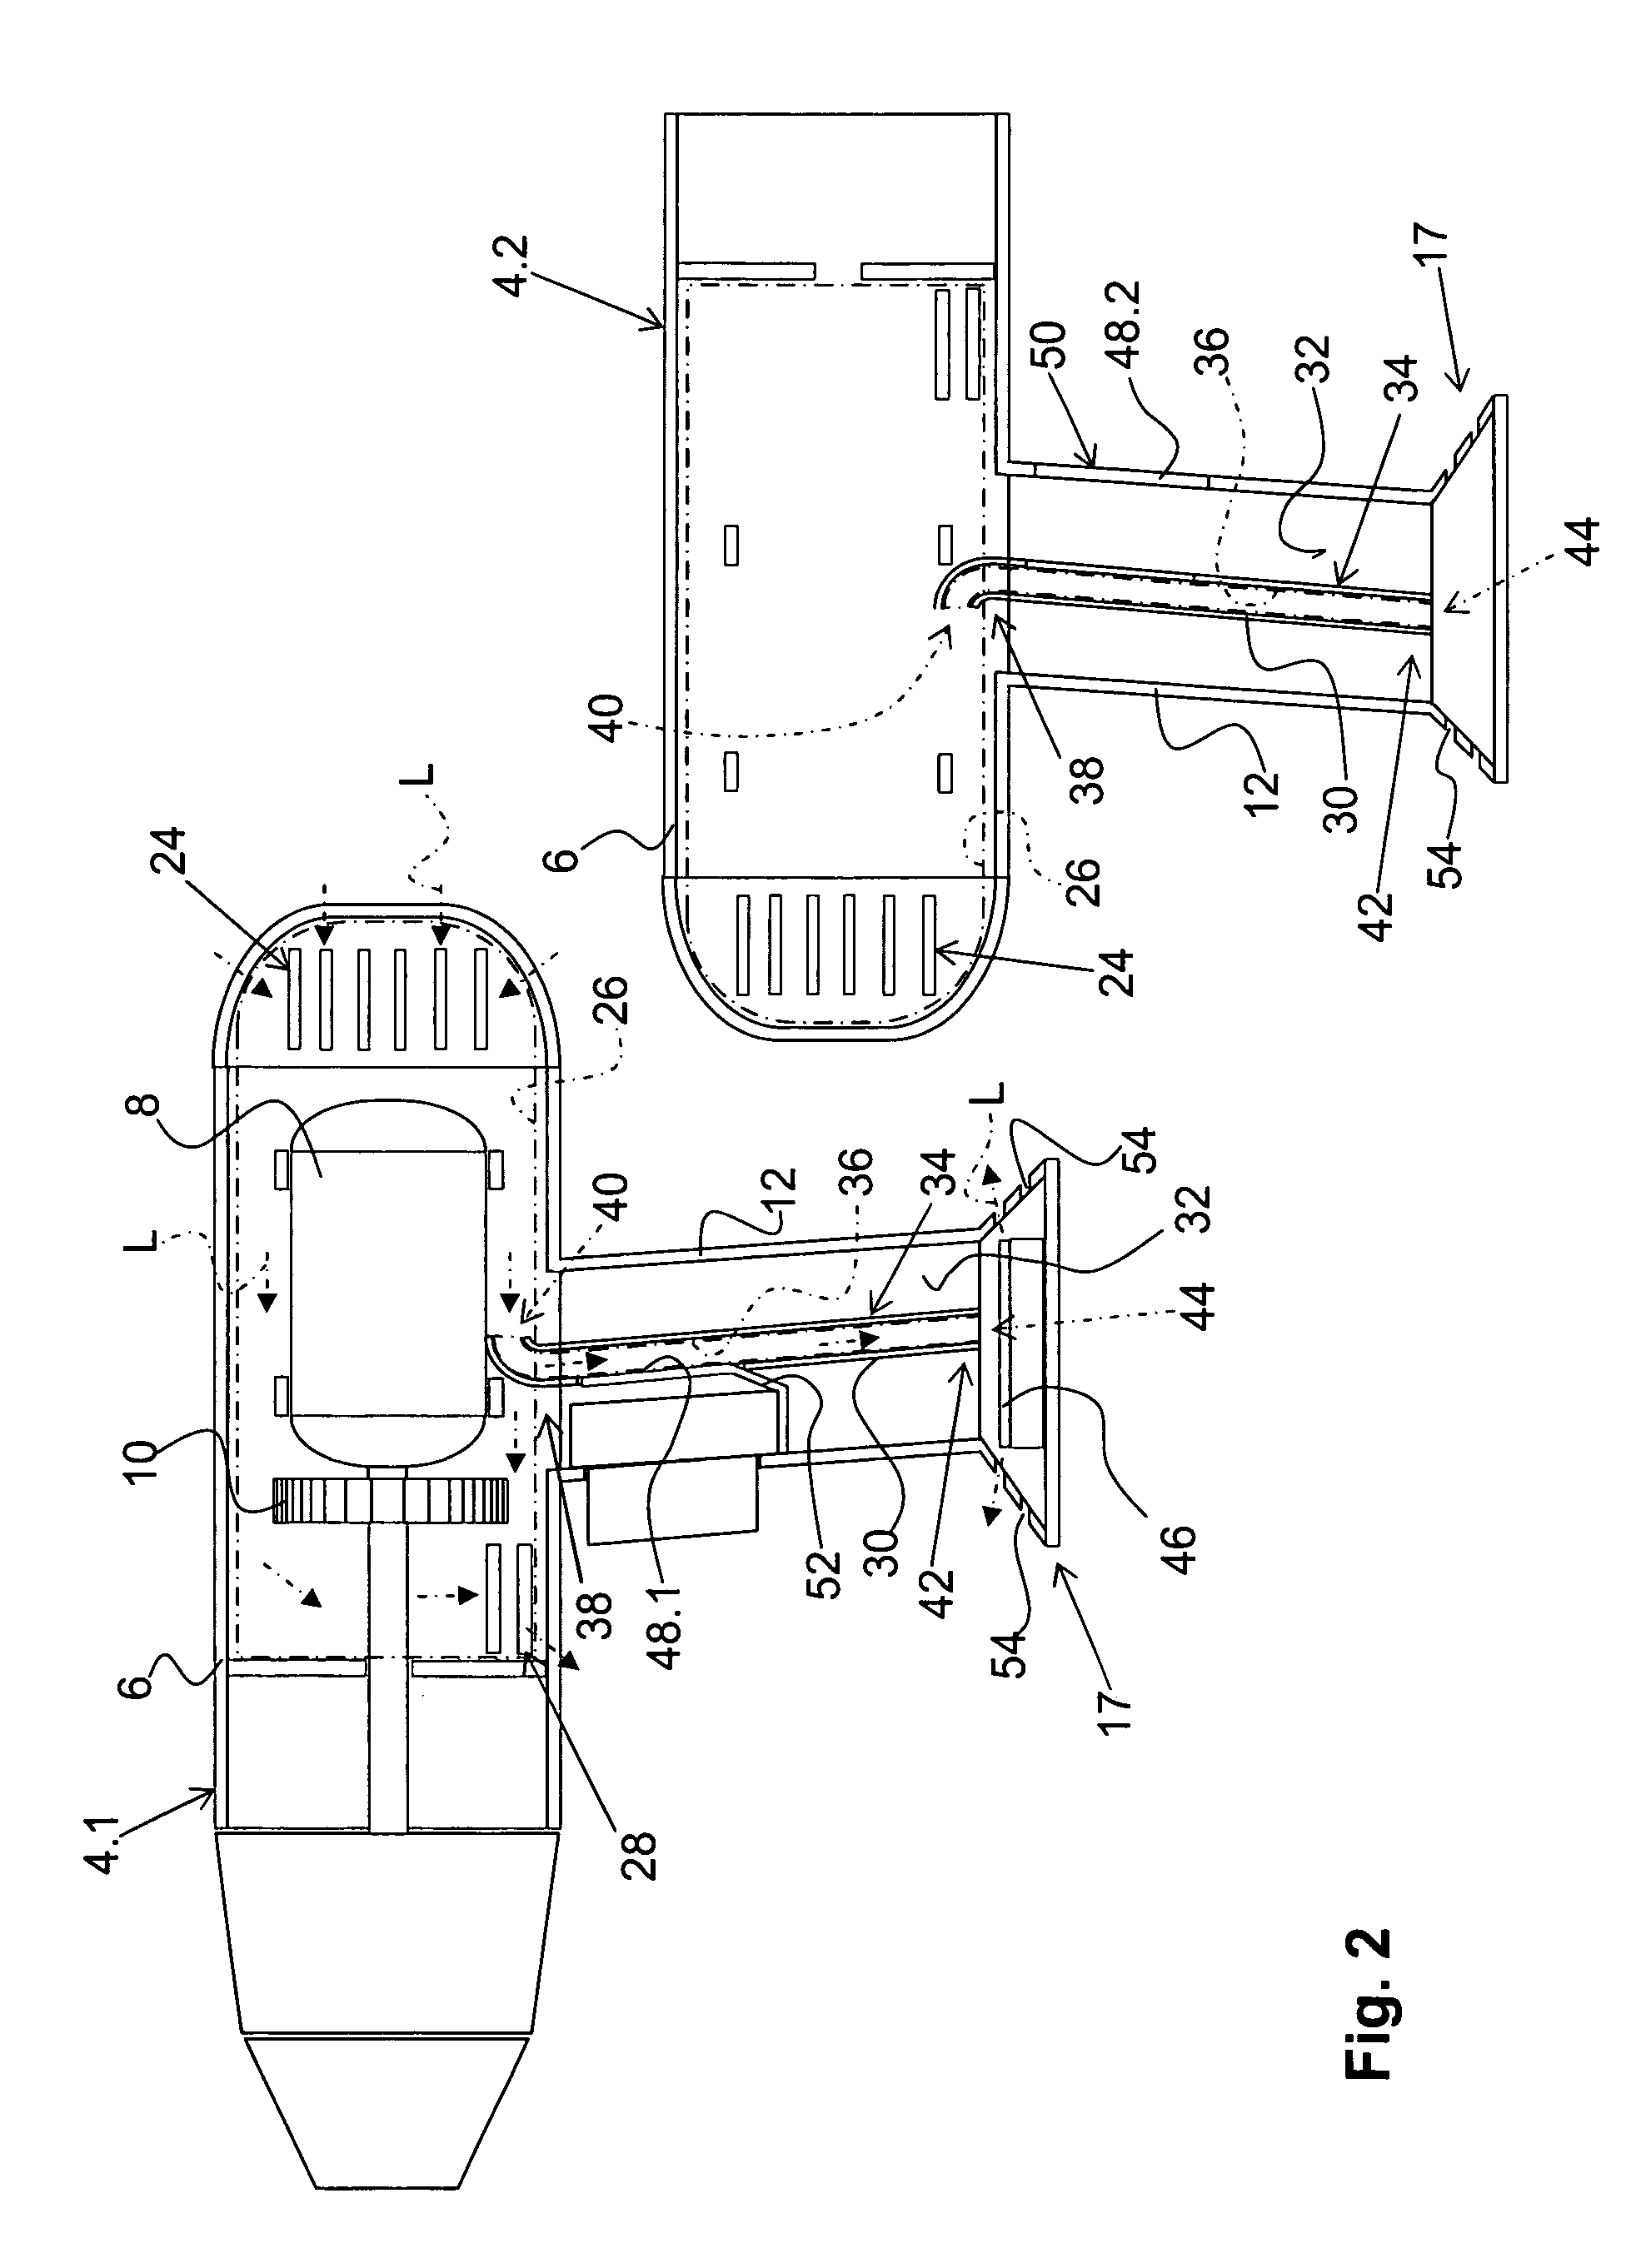 Electrical hand-held power tool with cooling of electronics